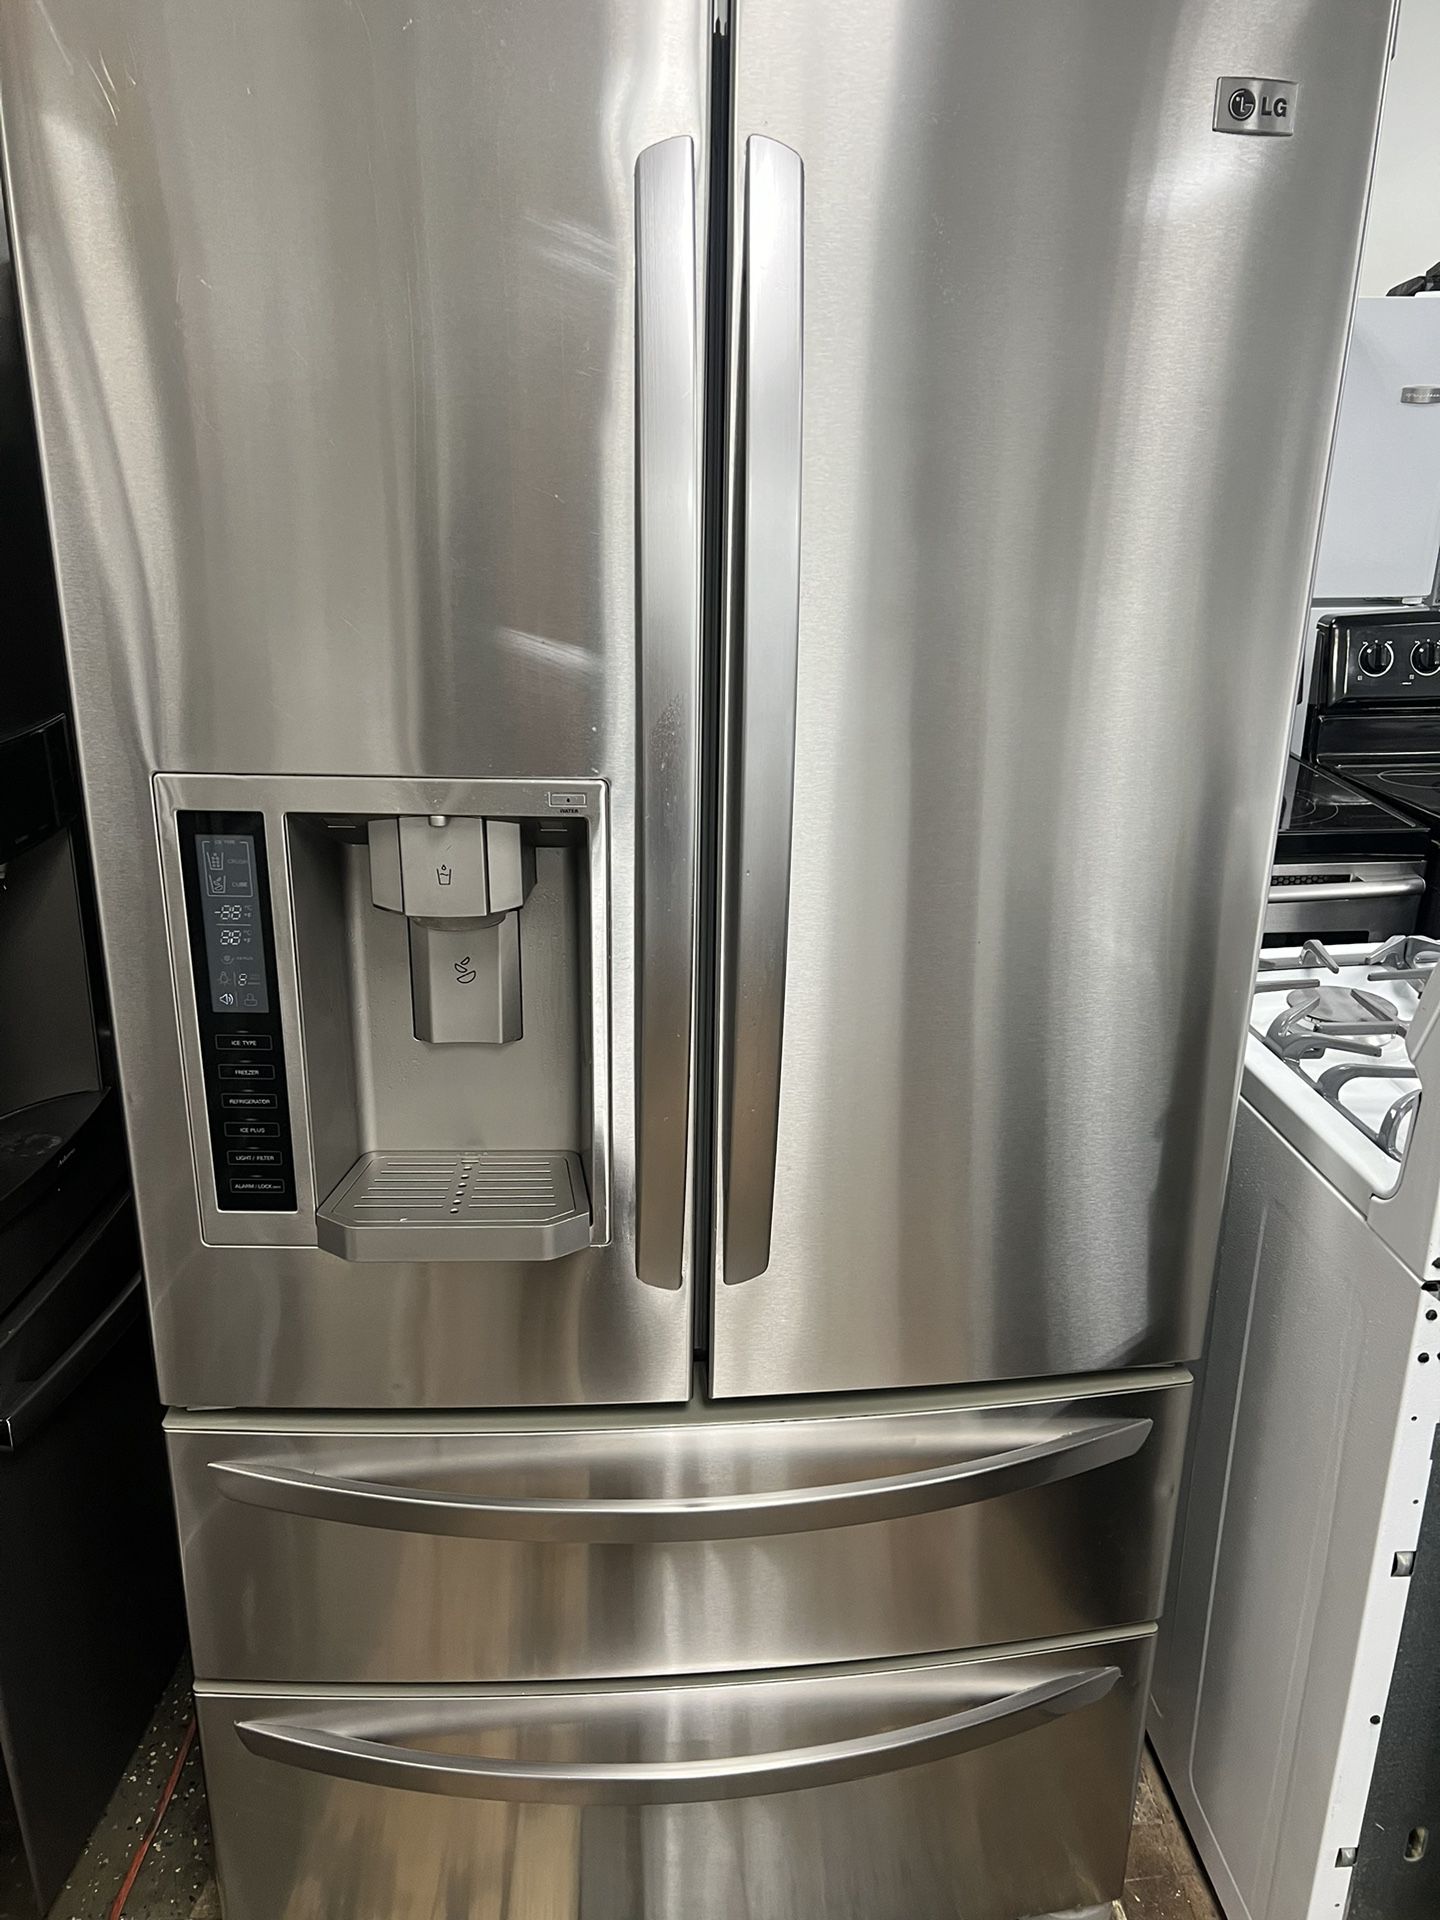 Stainless Steel Refrigerator LG 36”69” 4 Door Like Brand New And 3 Months Warranty 